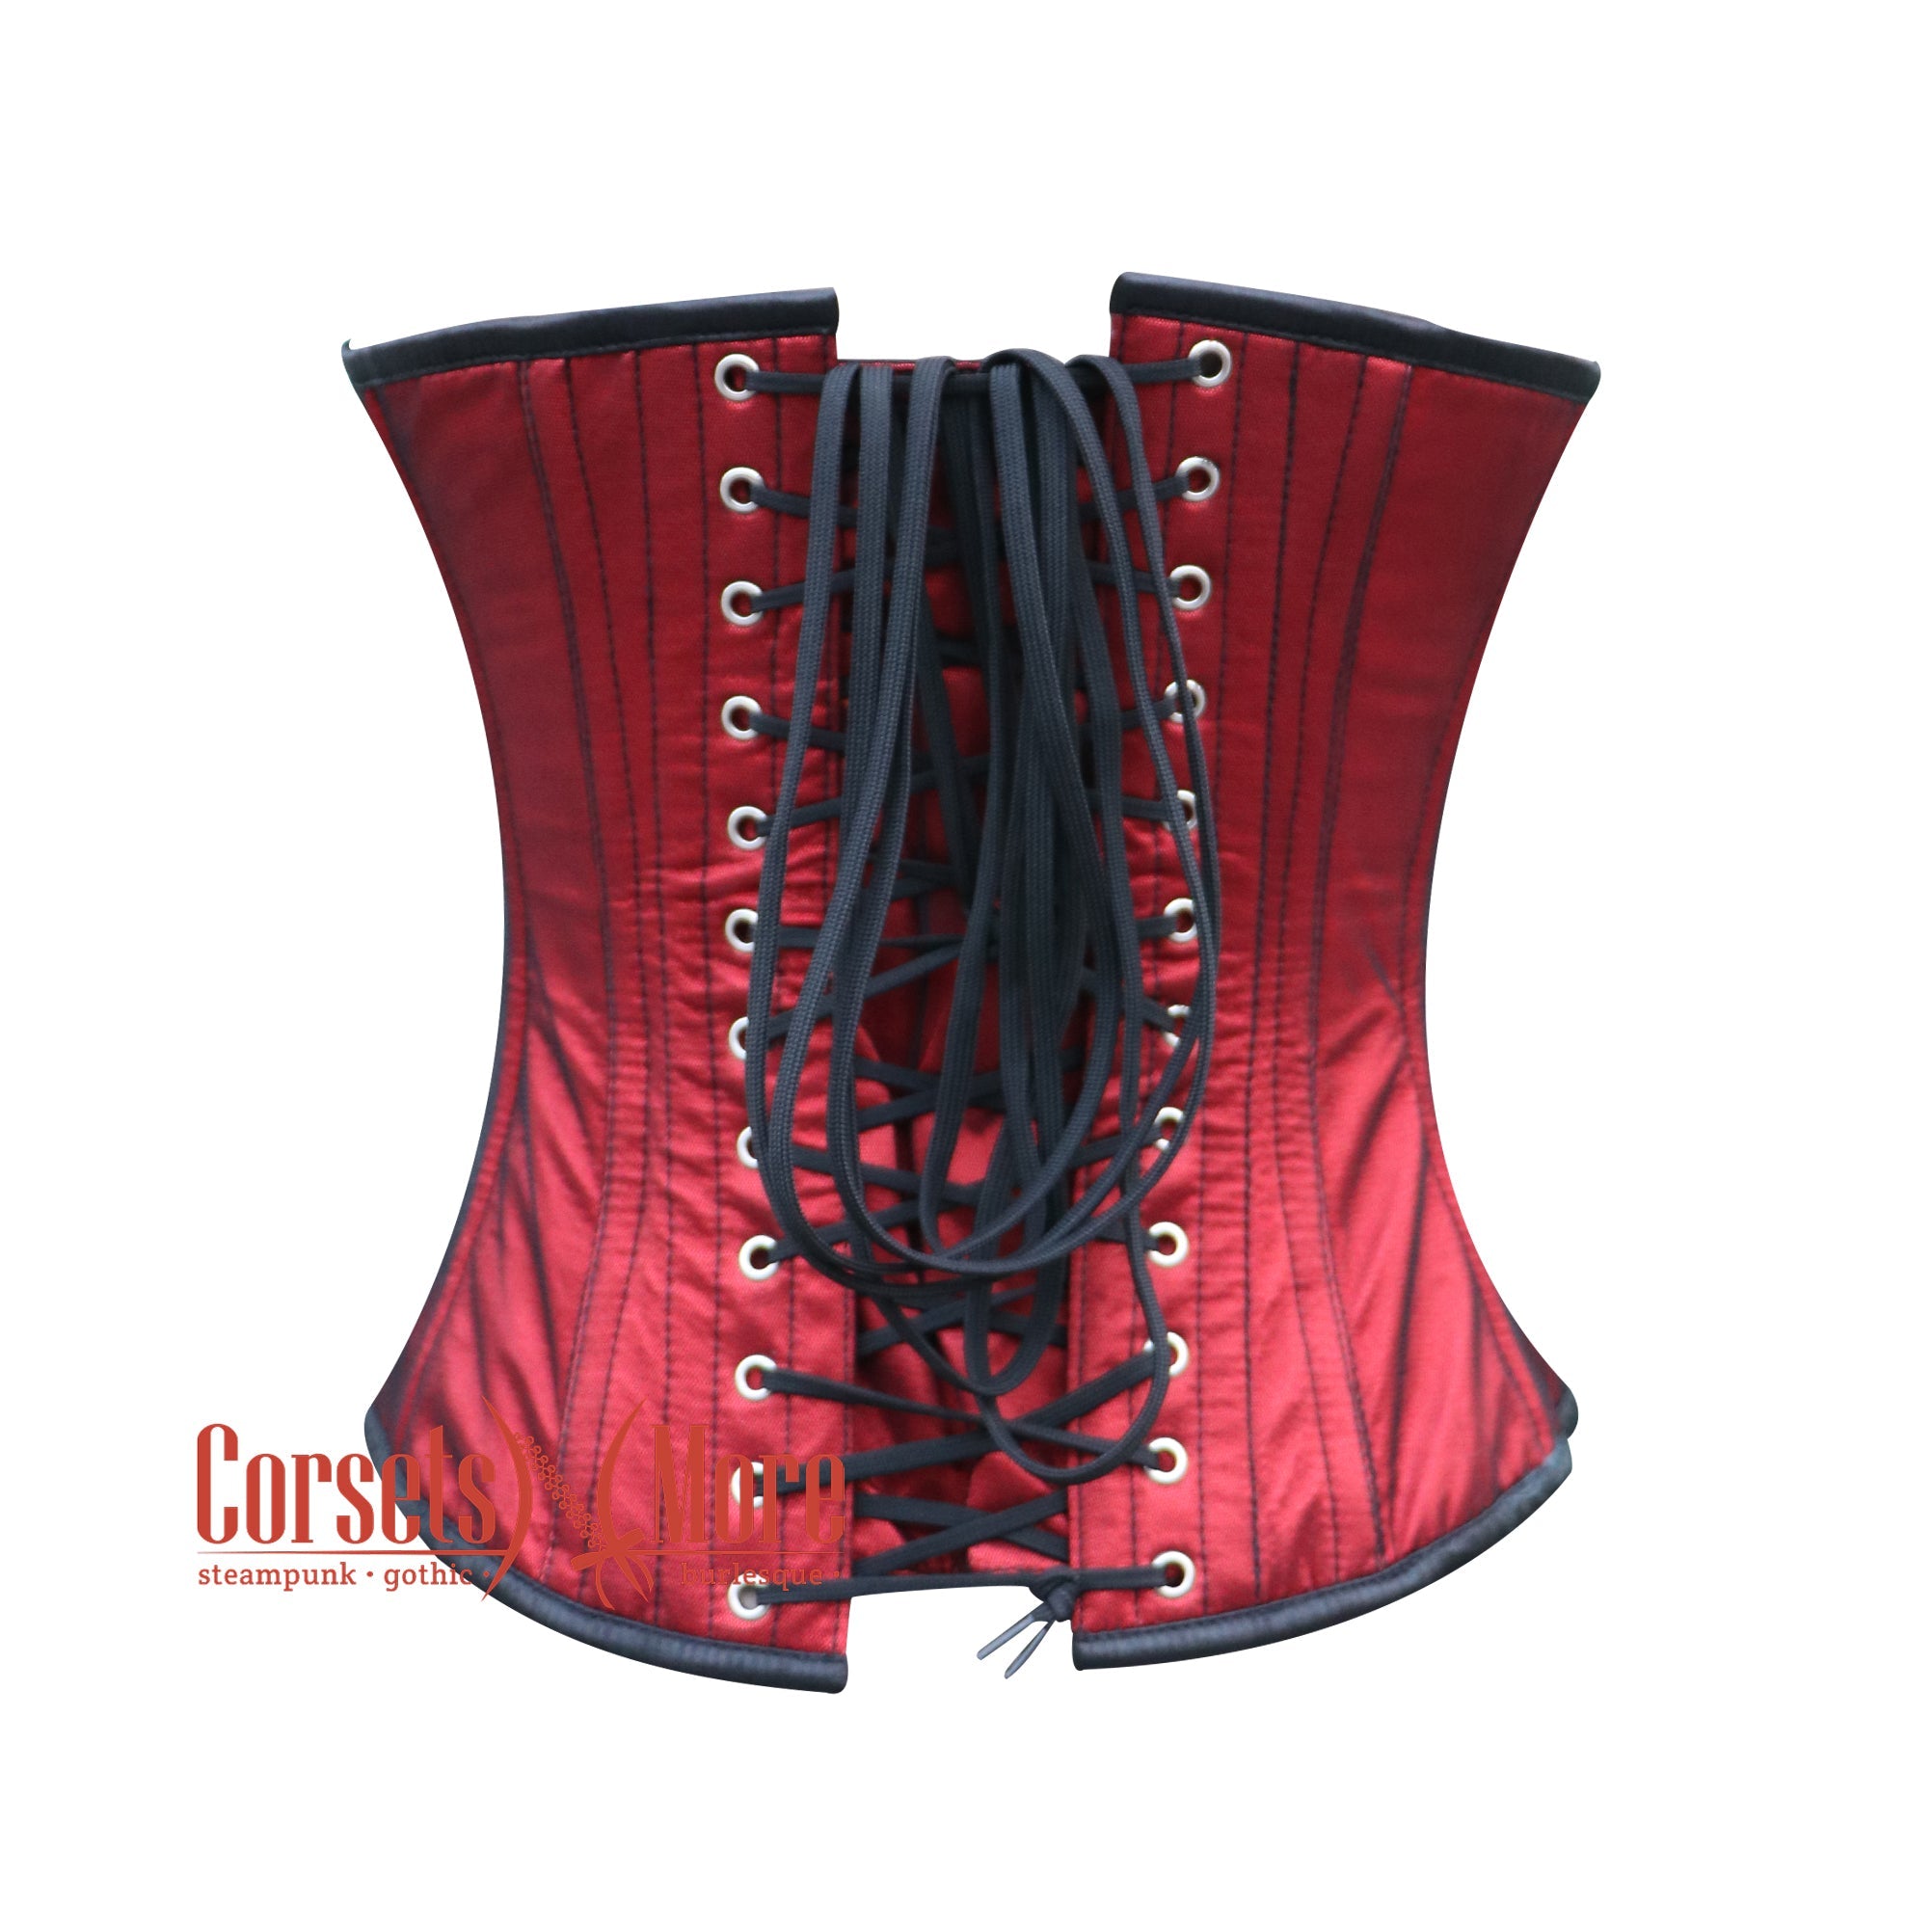 Red Cotton Black Satin Piping Gothic Overbust Plus Size Corset Waist  Training Burlesque Costume Top & Dress